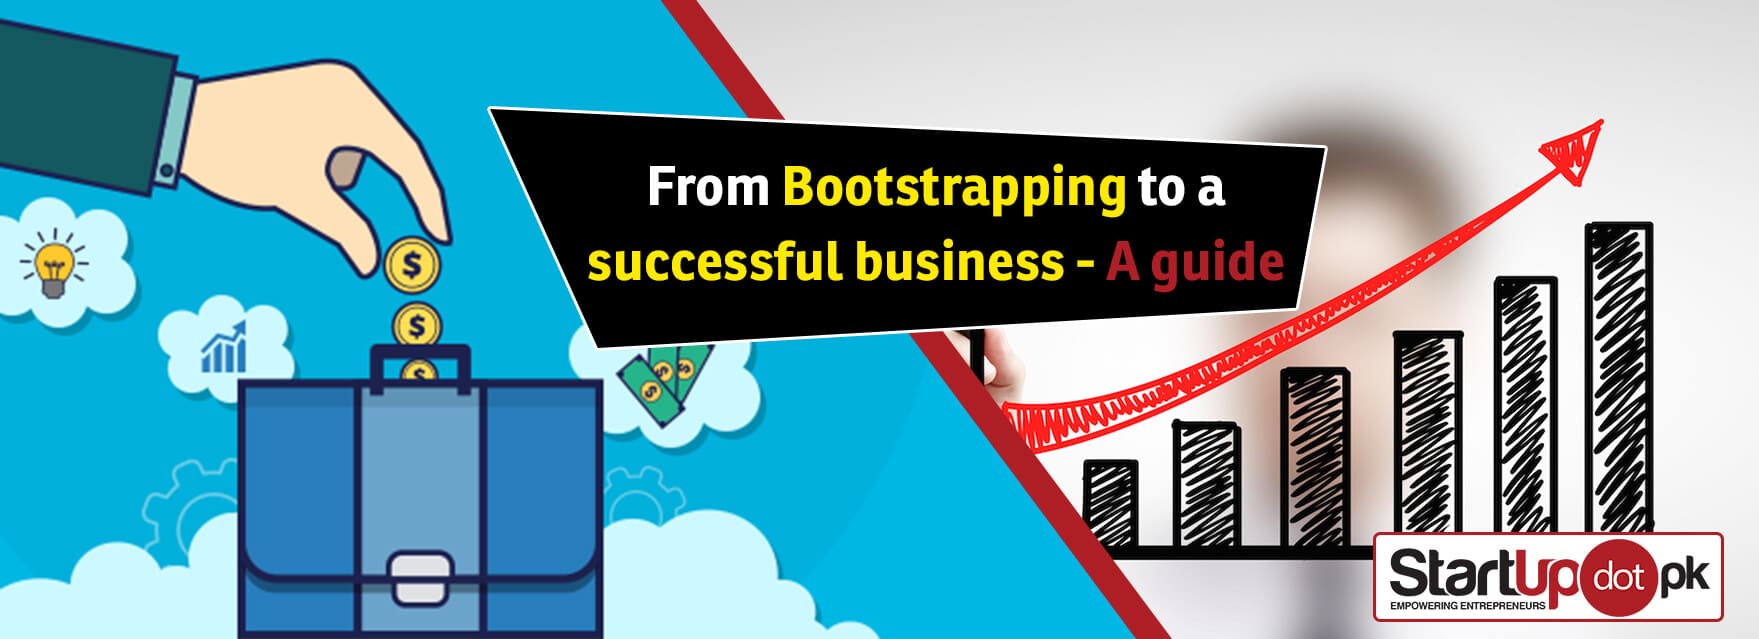 From Bootstrapping to a Successful business